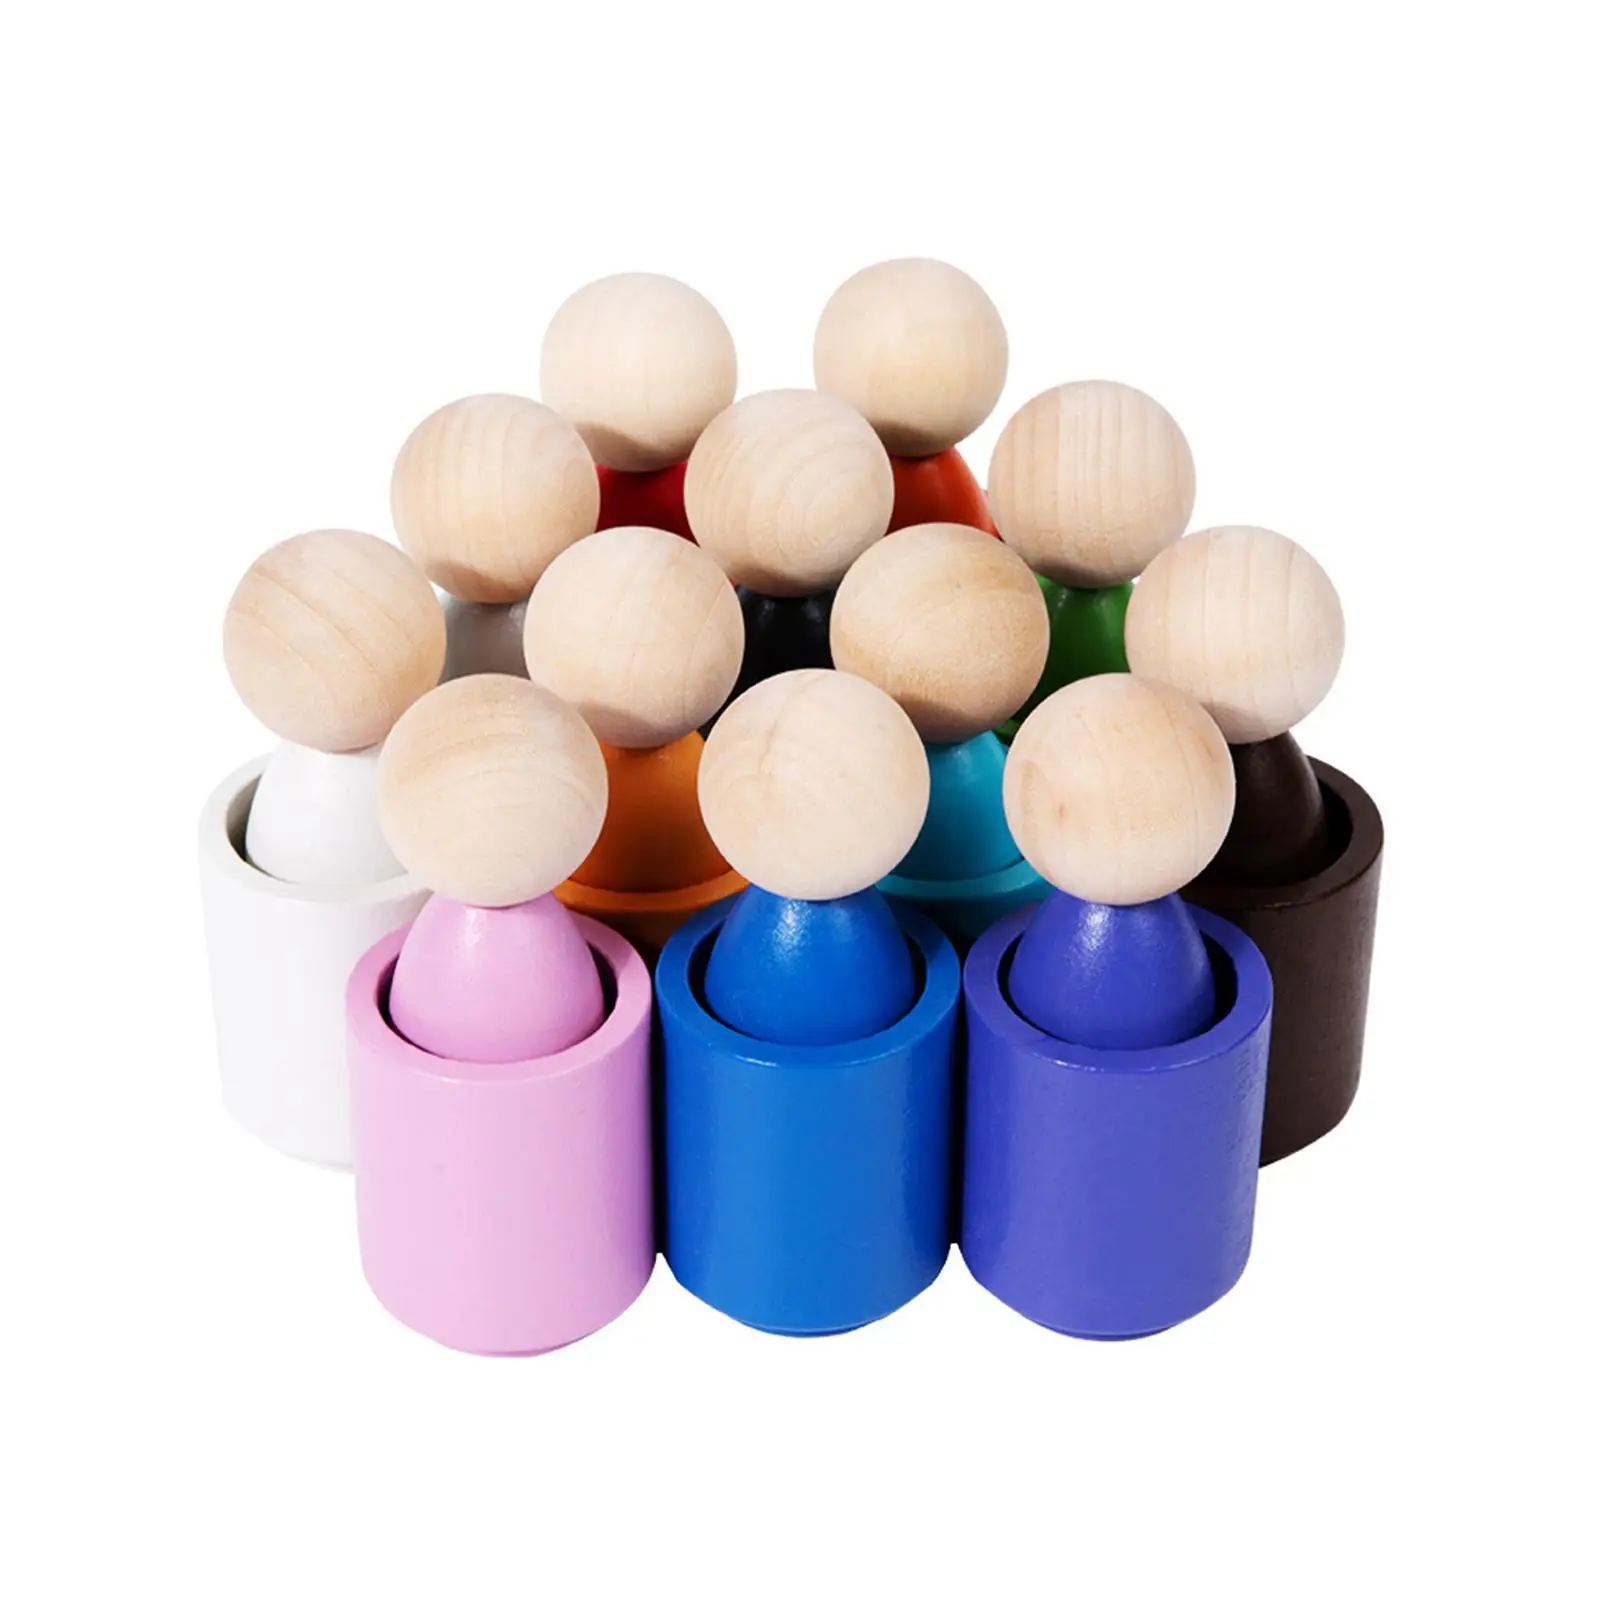 Balls in Cups Montessori Color Classification Educational Toys Wooden Sorter Game for Kids Toddlers Girls Birthday Gifts